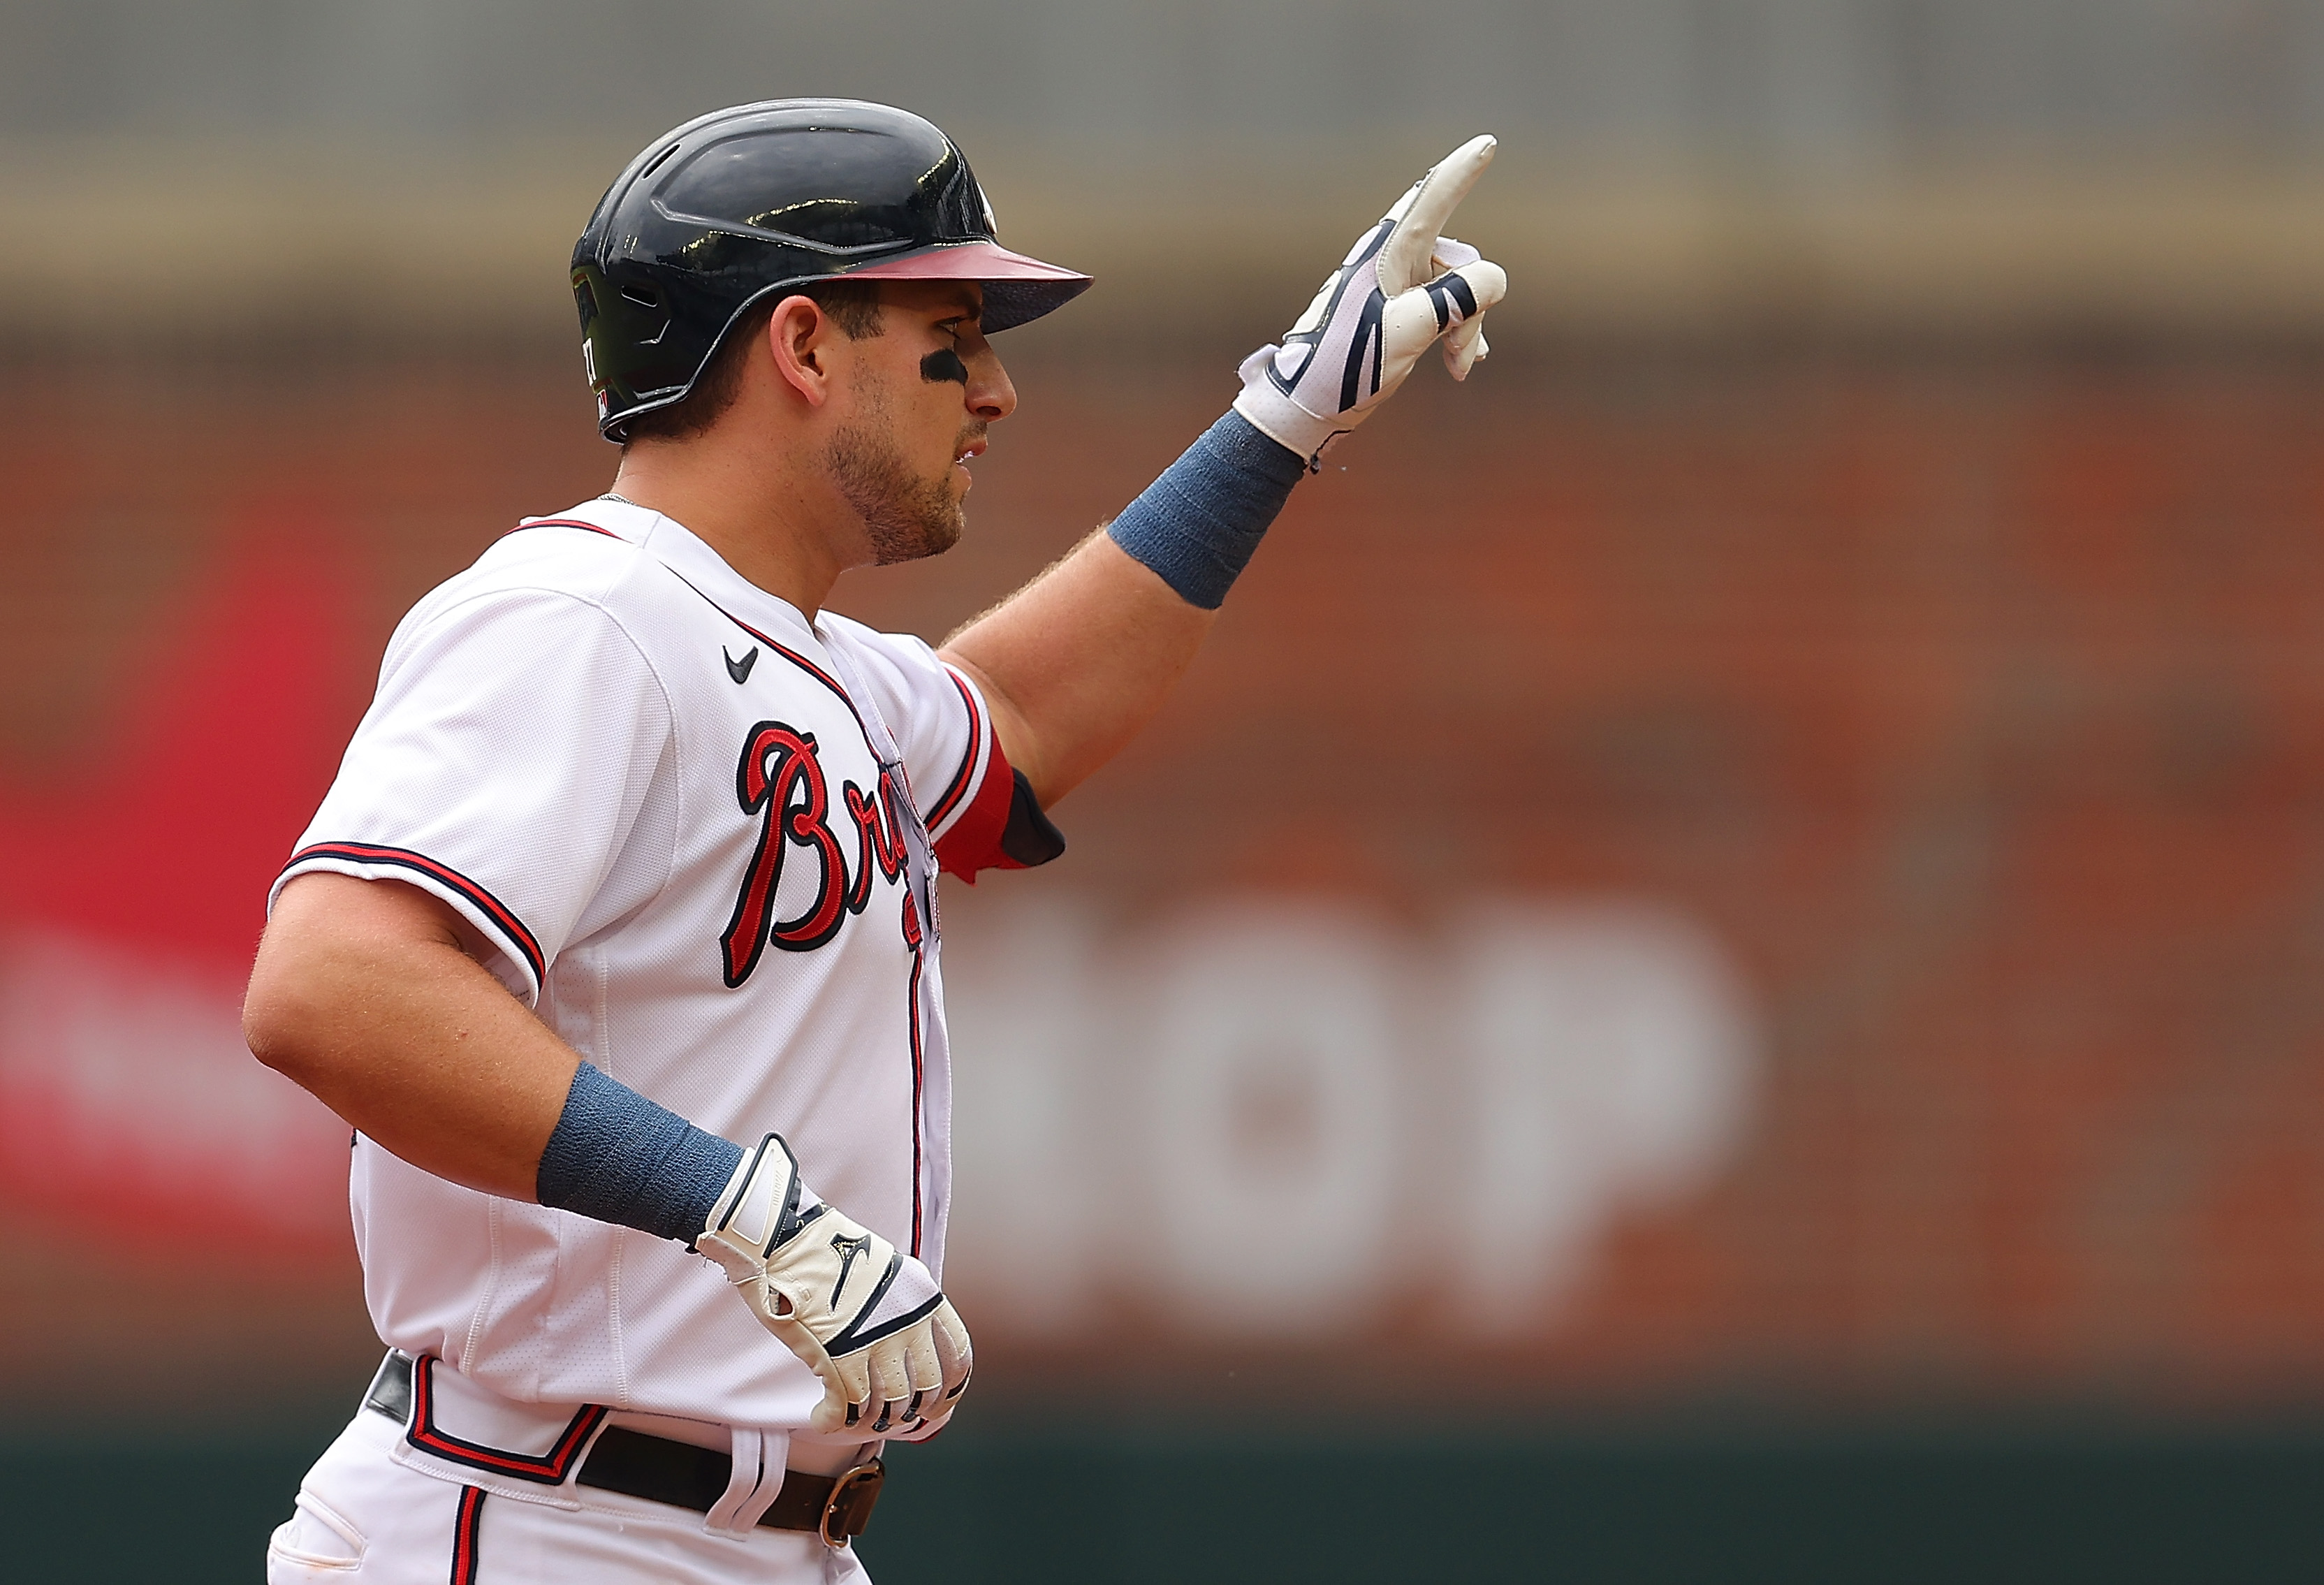 Austin Riley #27 of the Atlanta Braves reacts after hitting a double to lead off the second inning against the Philadelphia Phillies at Truist Park on August 03, 2022 in Atlanta, Georgia.